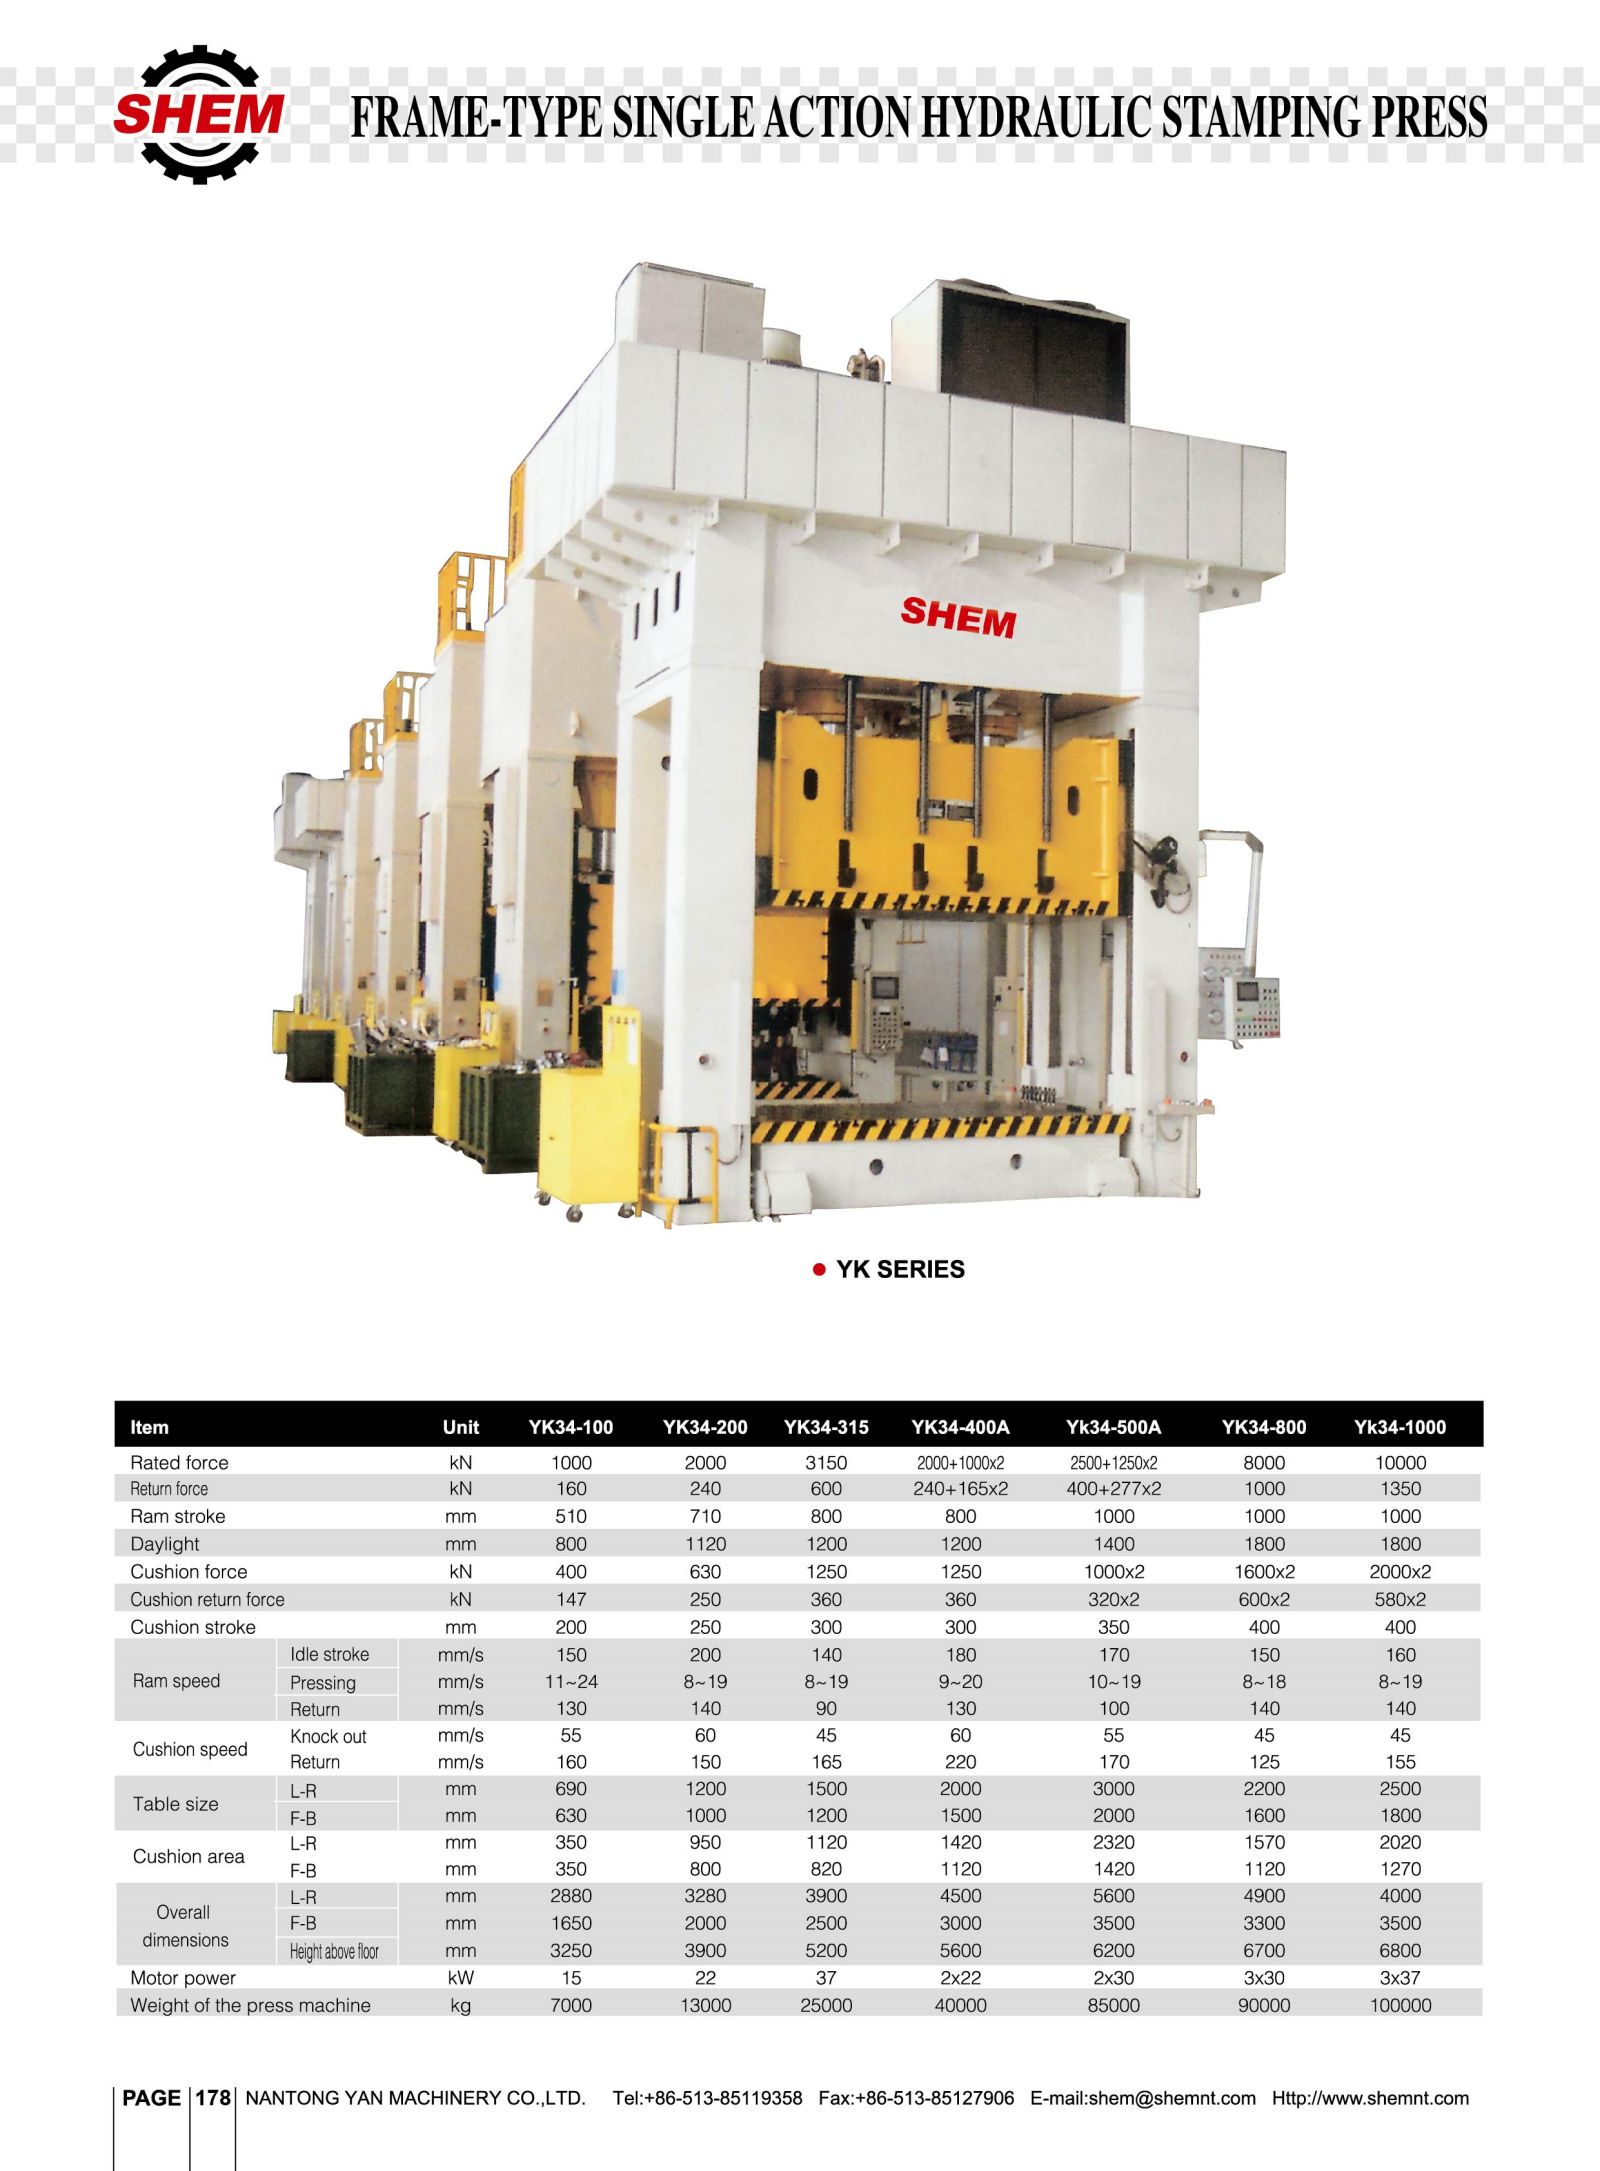 P178 FRAME-TYPE SINGLE ACTION HYDRAULIC STAMPING PRESS